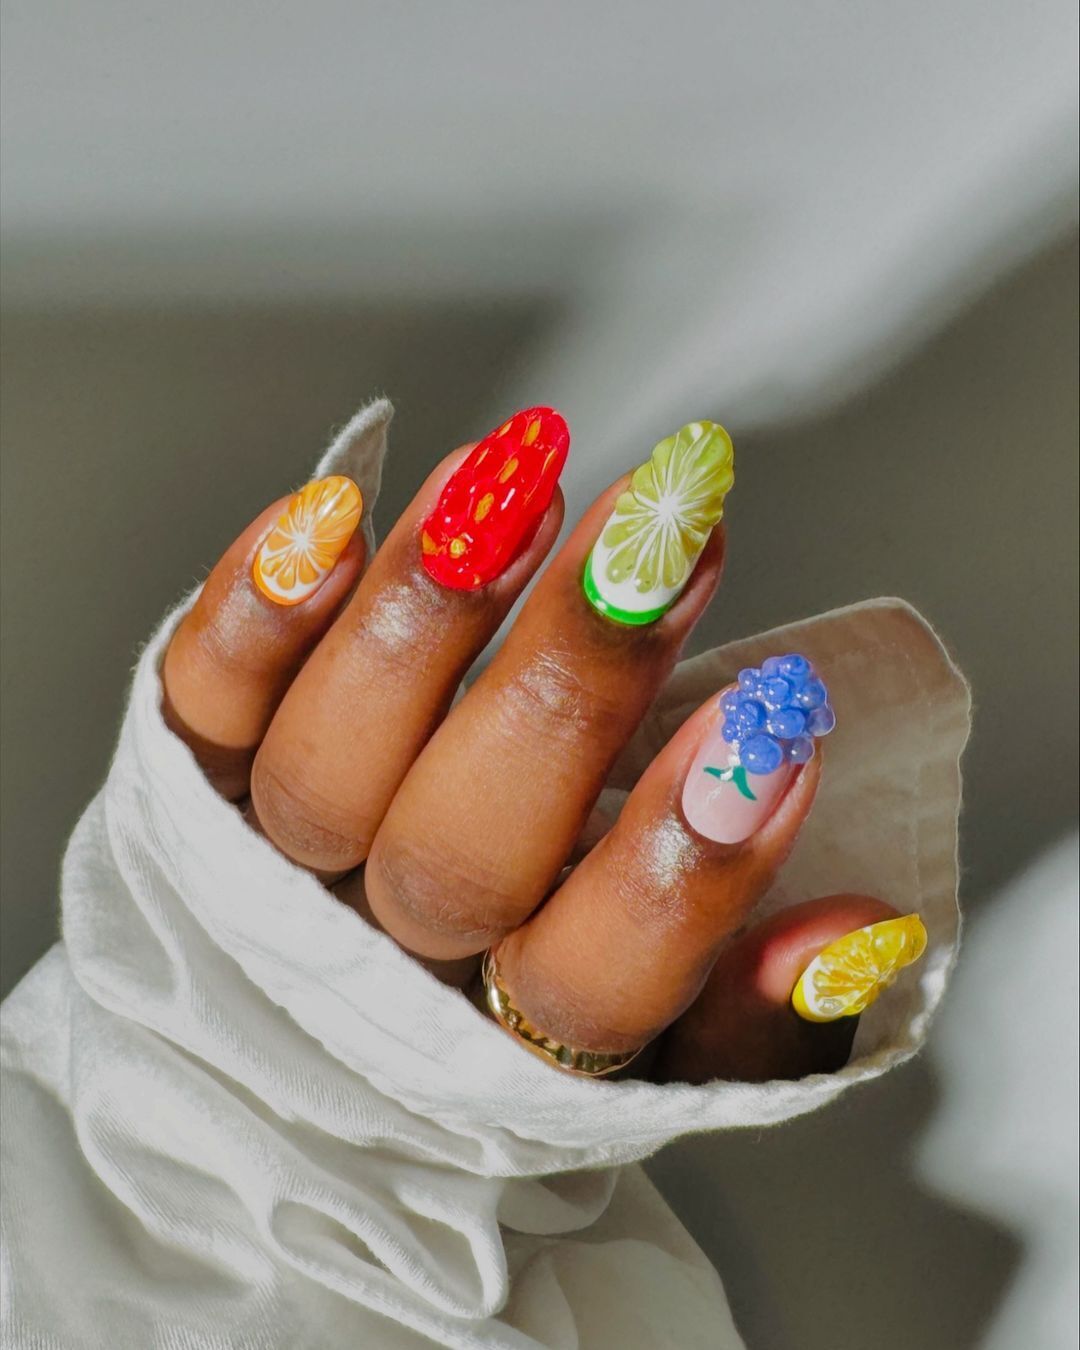 Fruit manicure. 10 ideas for women who like to look bright